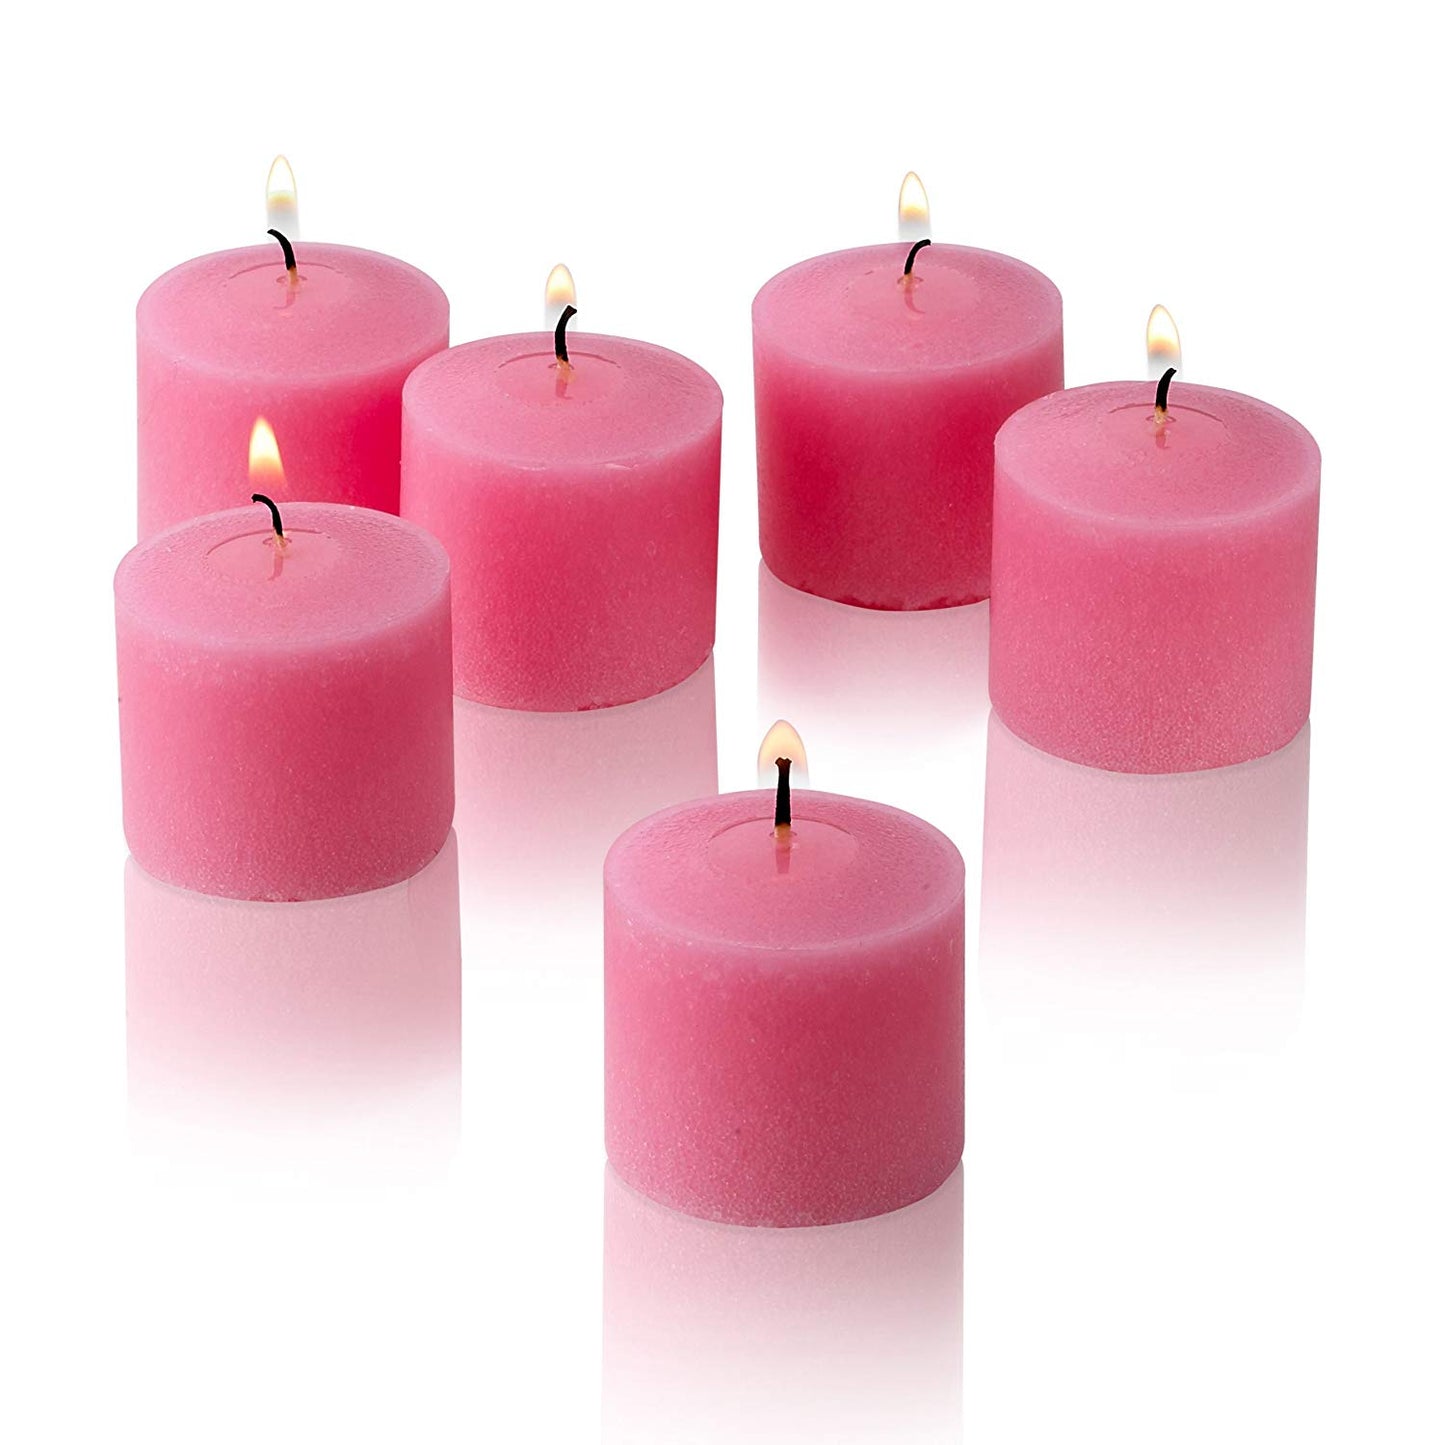 Wax Votive Candles 8 Hours Burning Unscented Ideal for Birthday Aromatherapy Party Candle Gardens & Home Décor (Set of 12, Baby Pink)